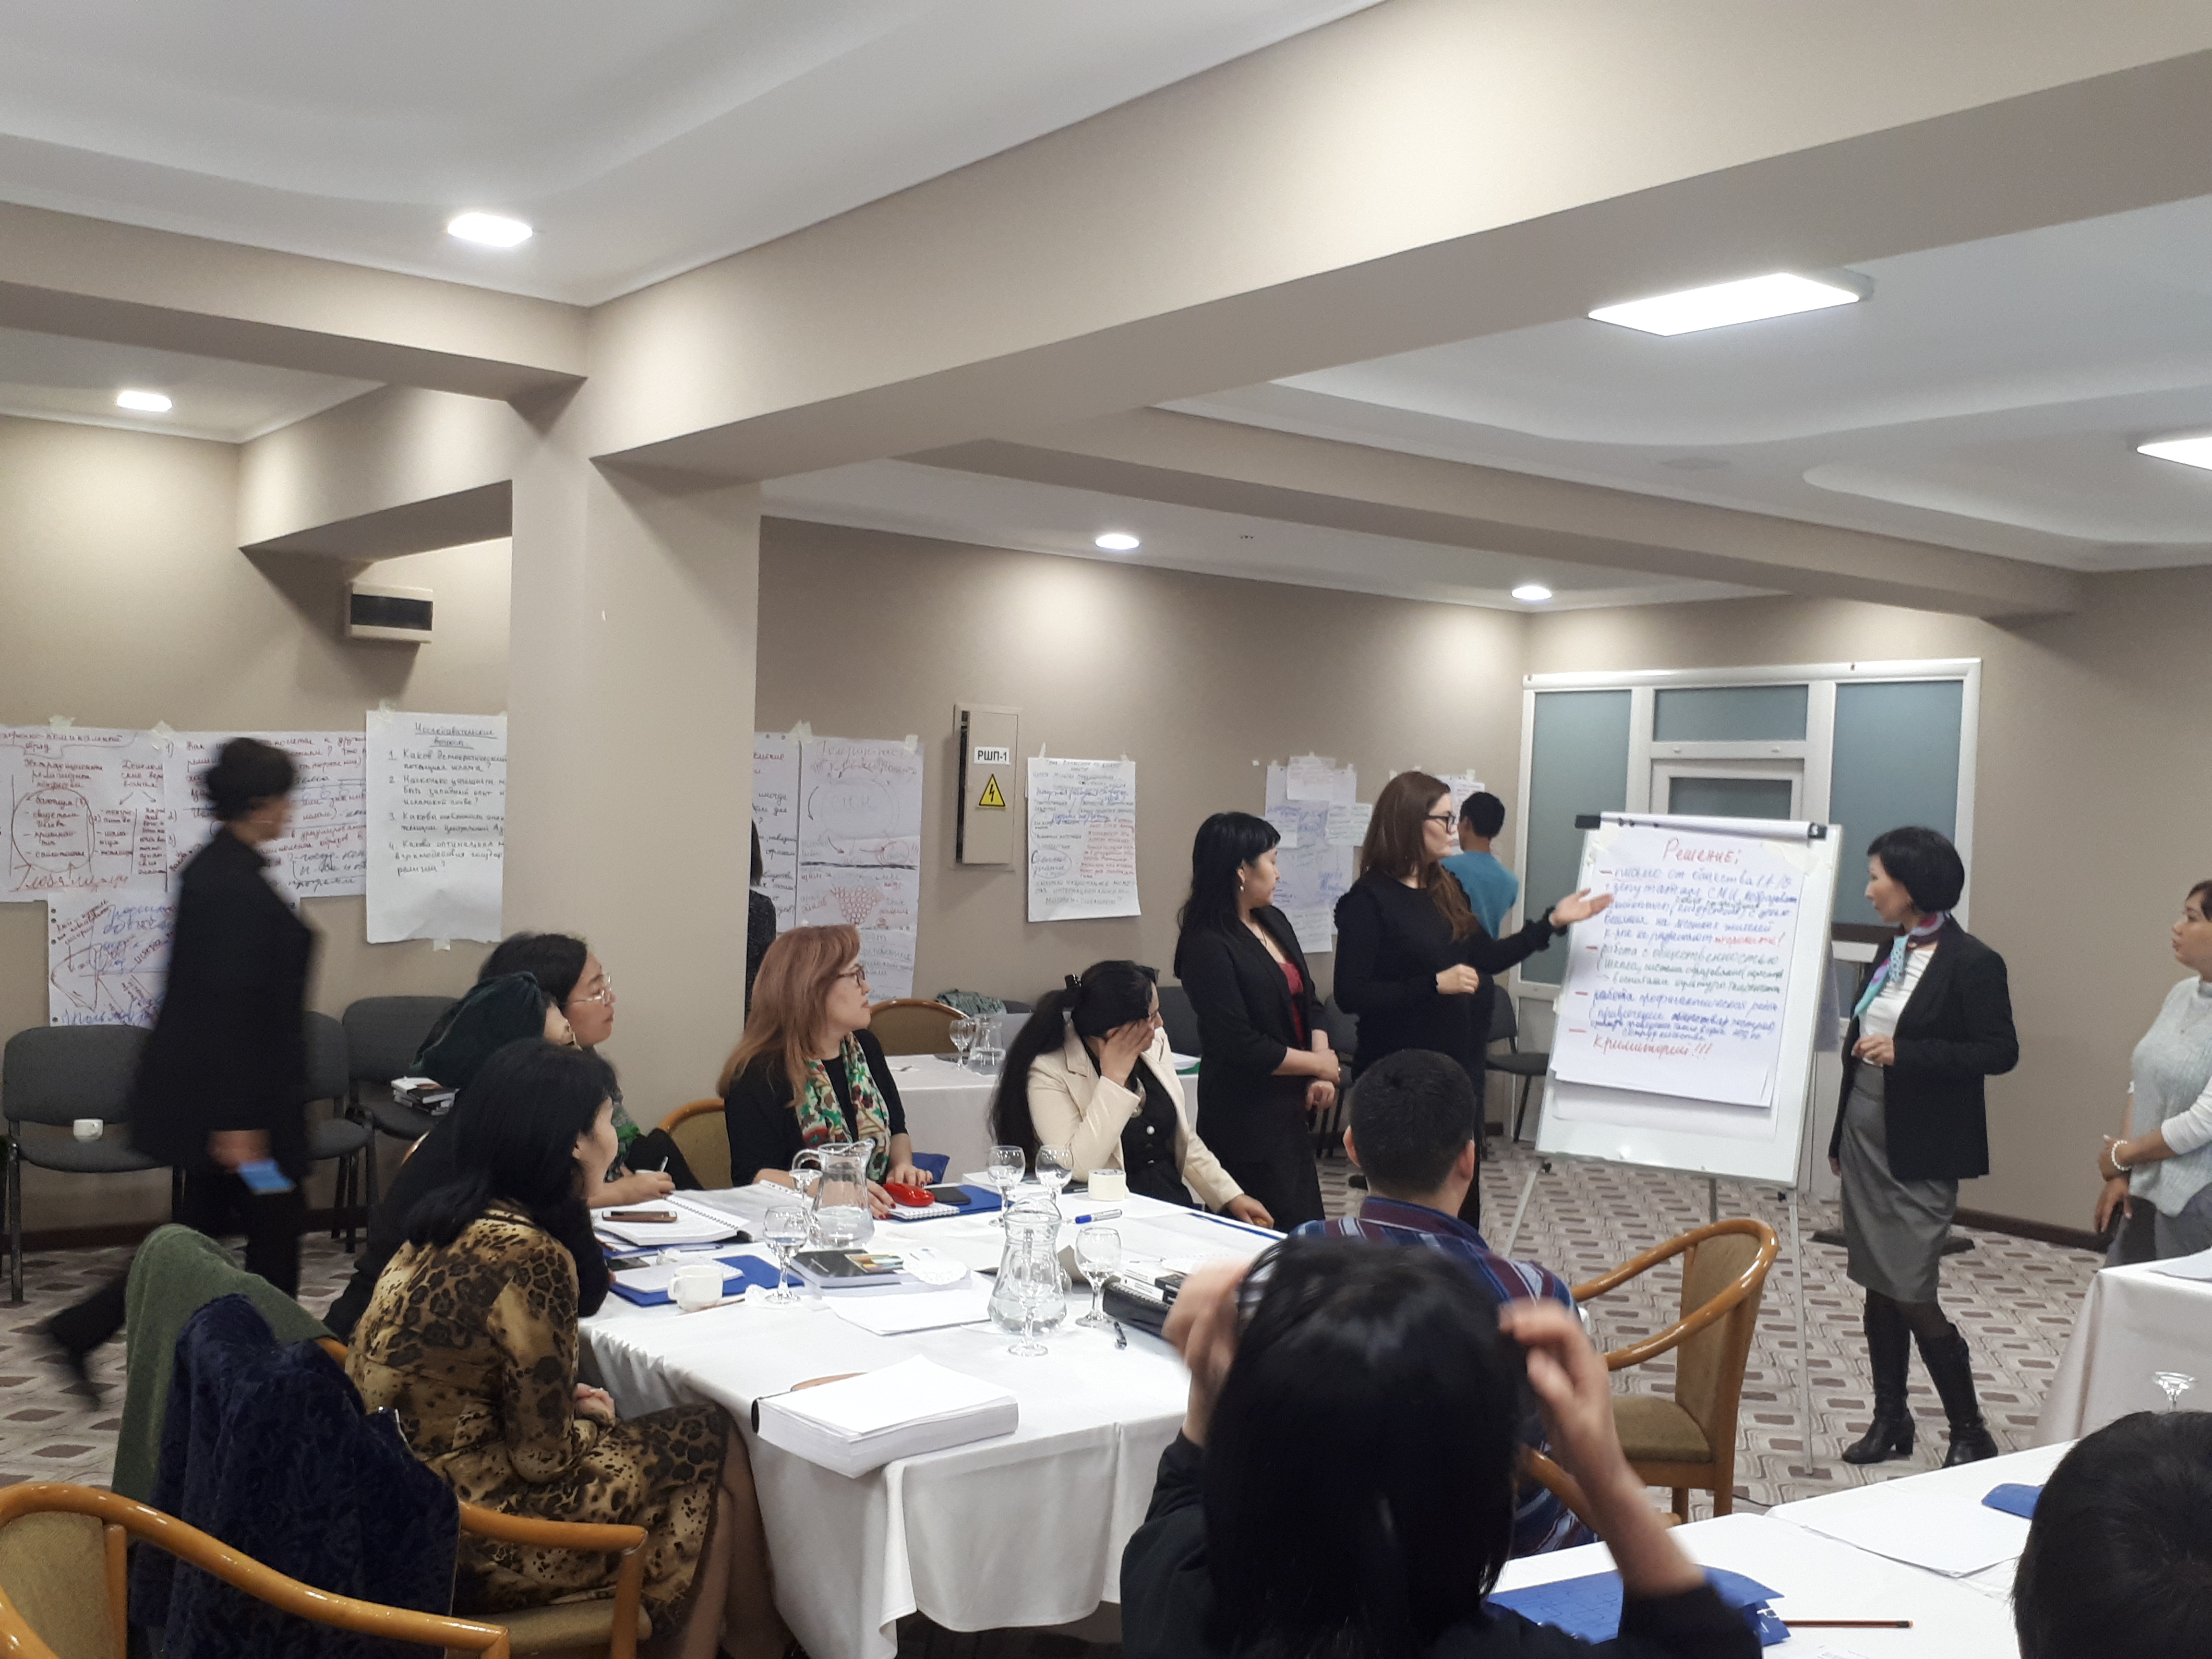 Tot Training On AKHP MA Course In Almaty April 2019